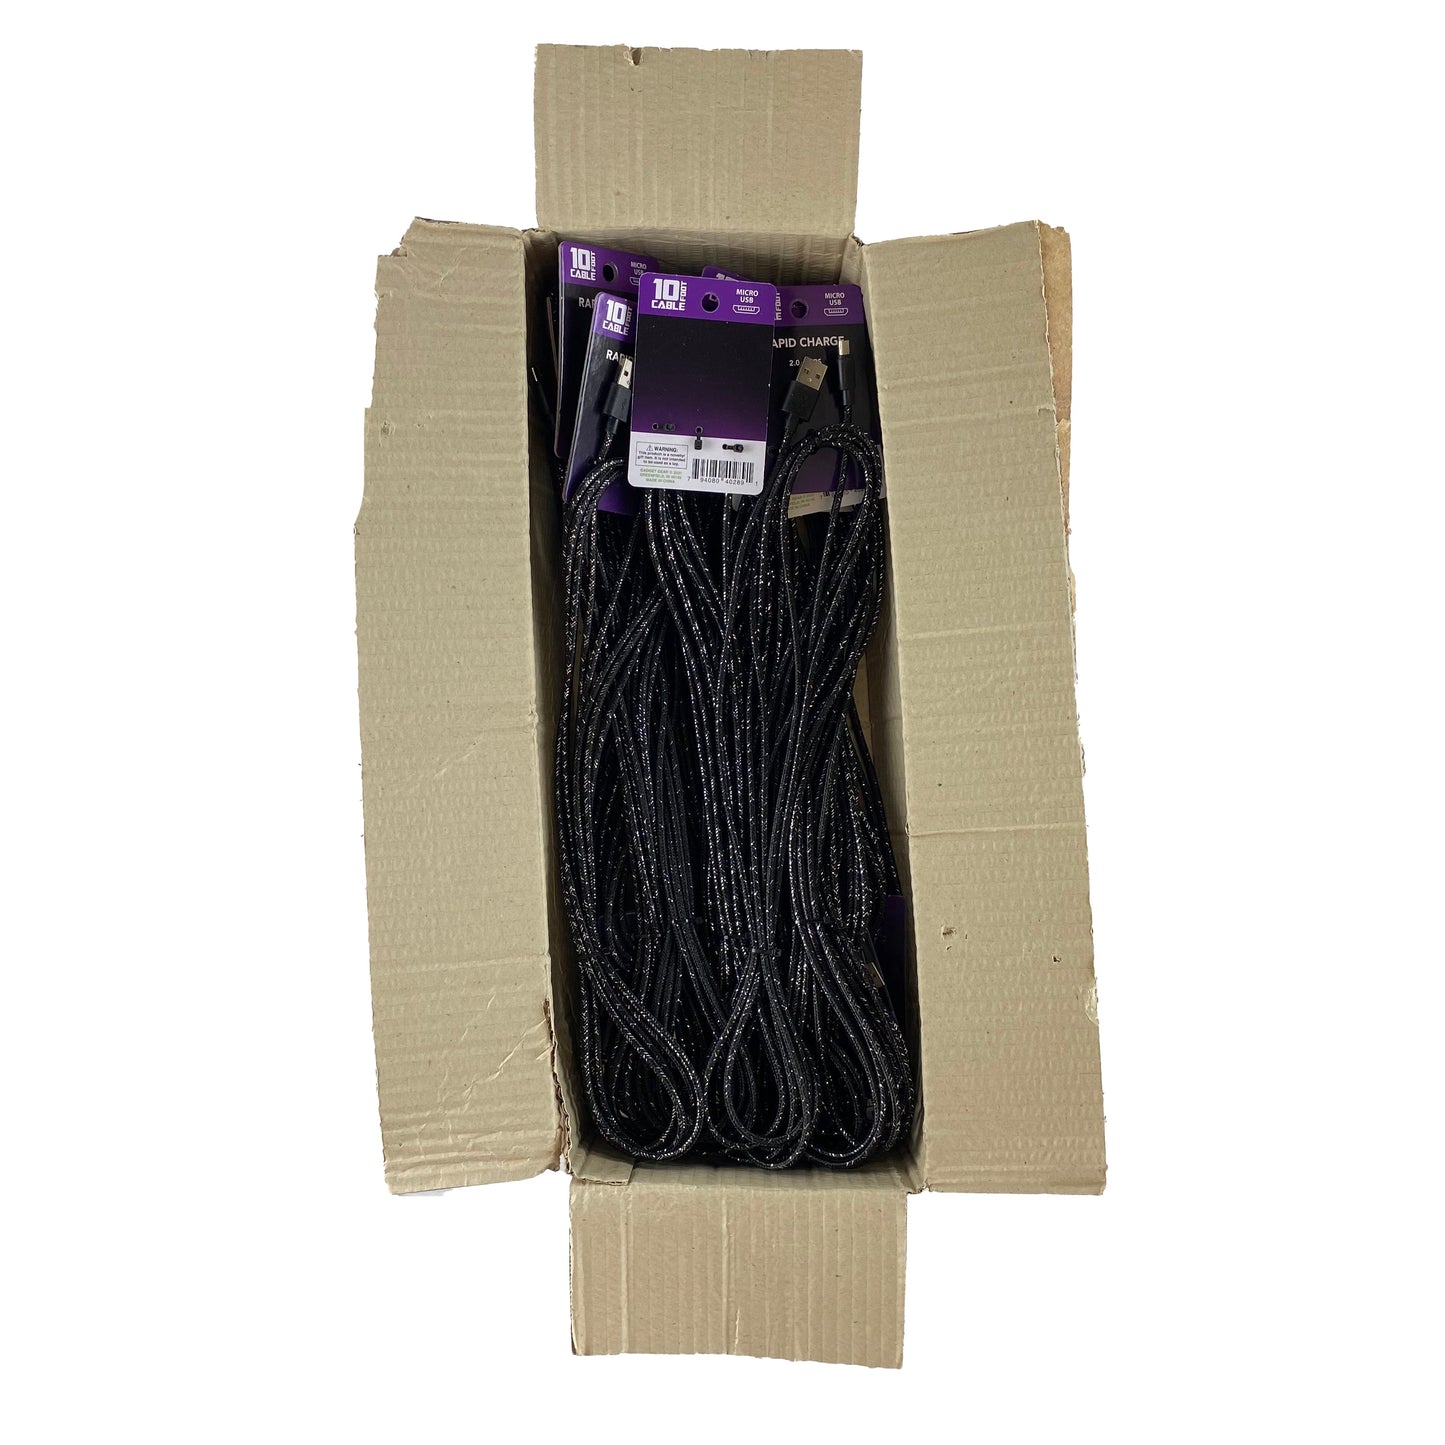 ITEM NUMBER 040289 10FT MICRO CABLE BLACK SILVER 18 PIECES PER PACK